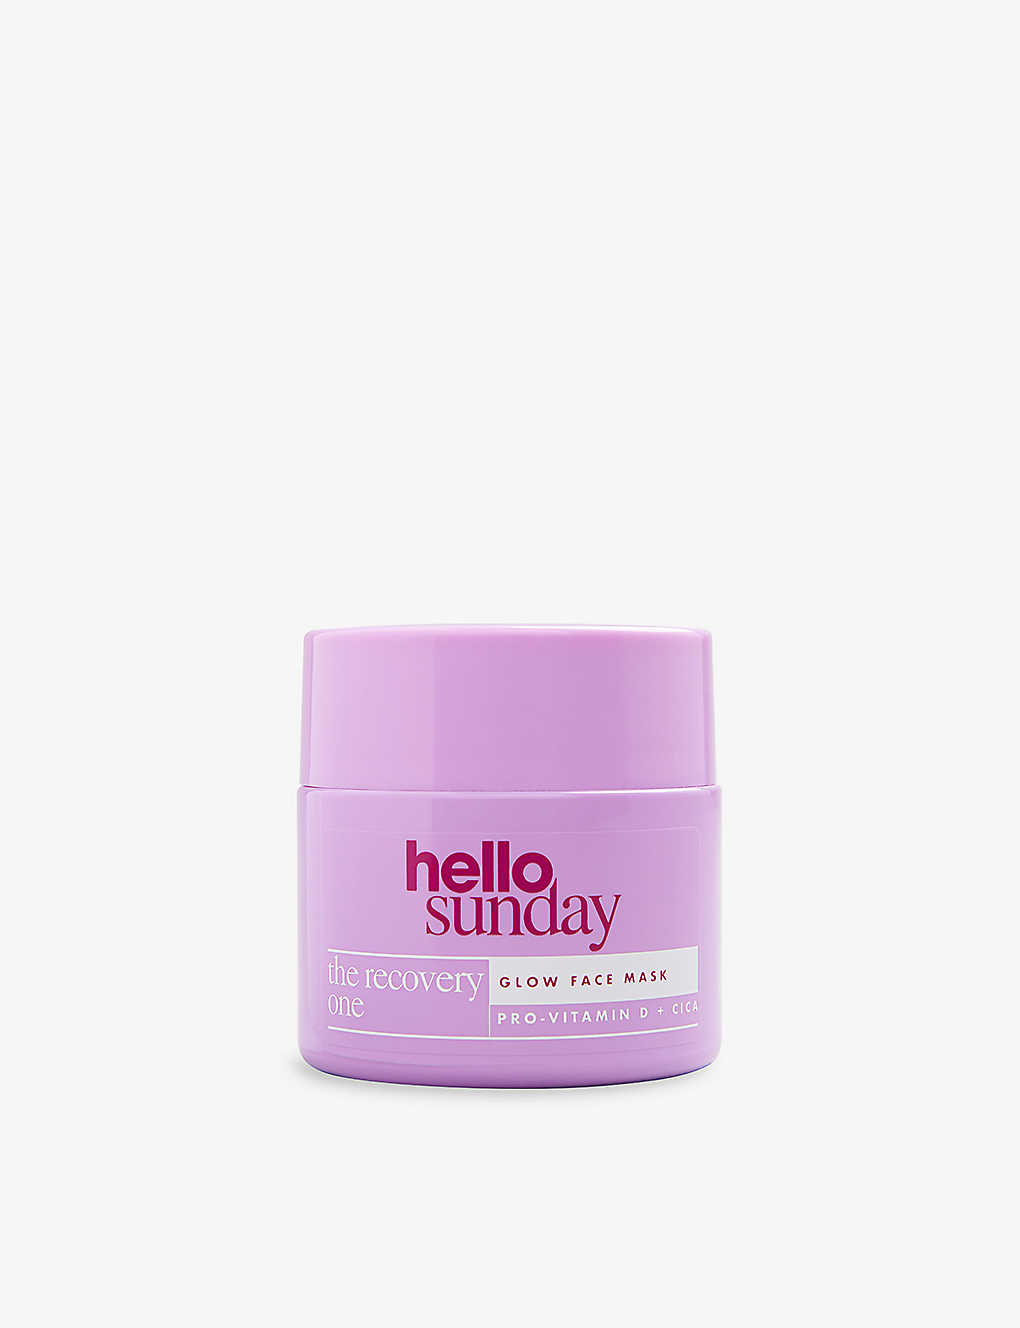 Hello Sunday The Recovery One Glow Face Mask